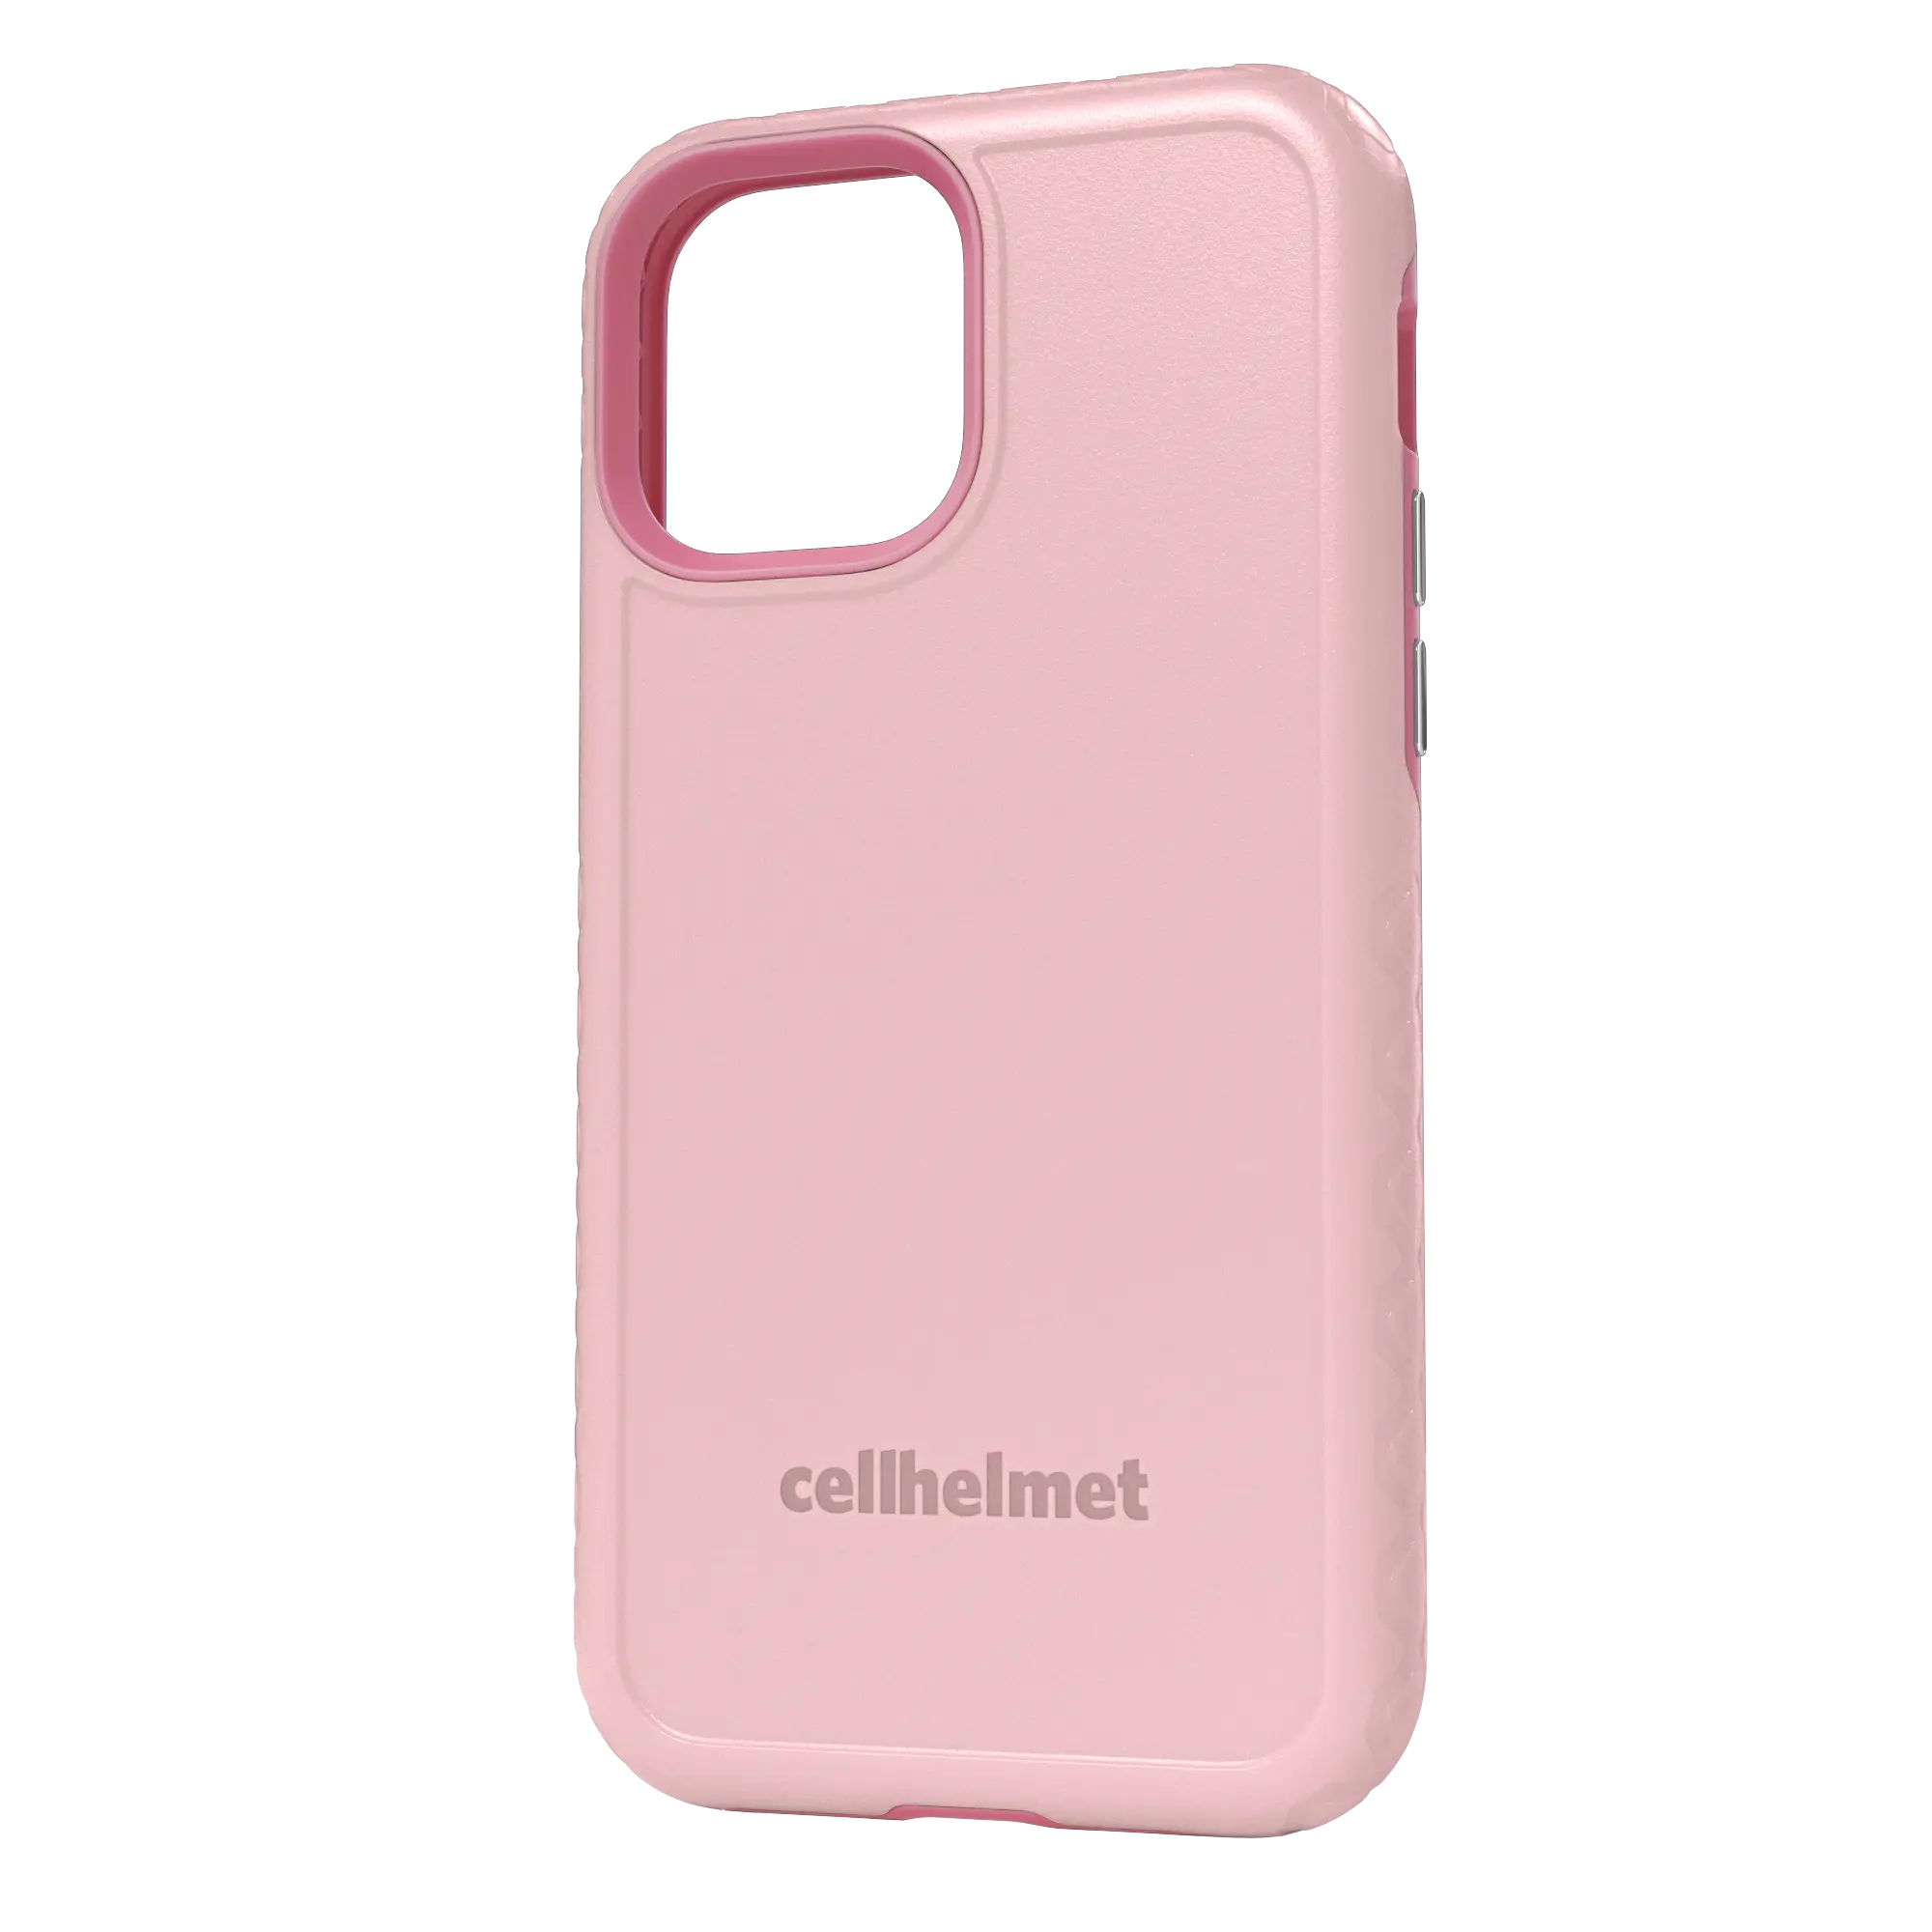 Pink cellhelmet Personalized Case for iPhone 12 Pro